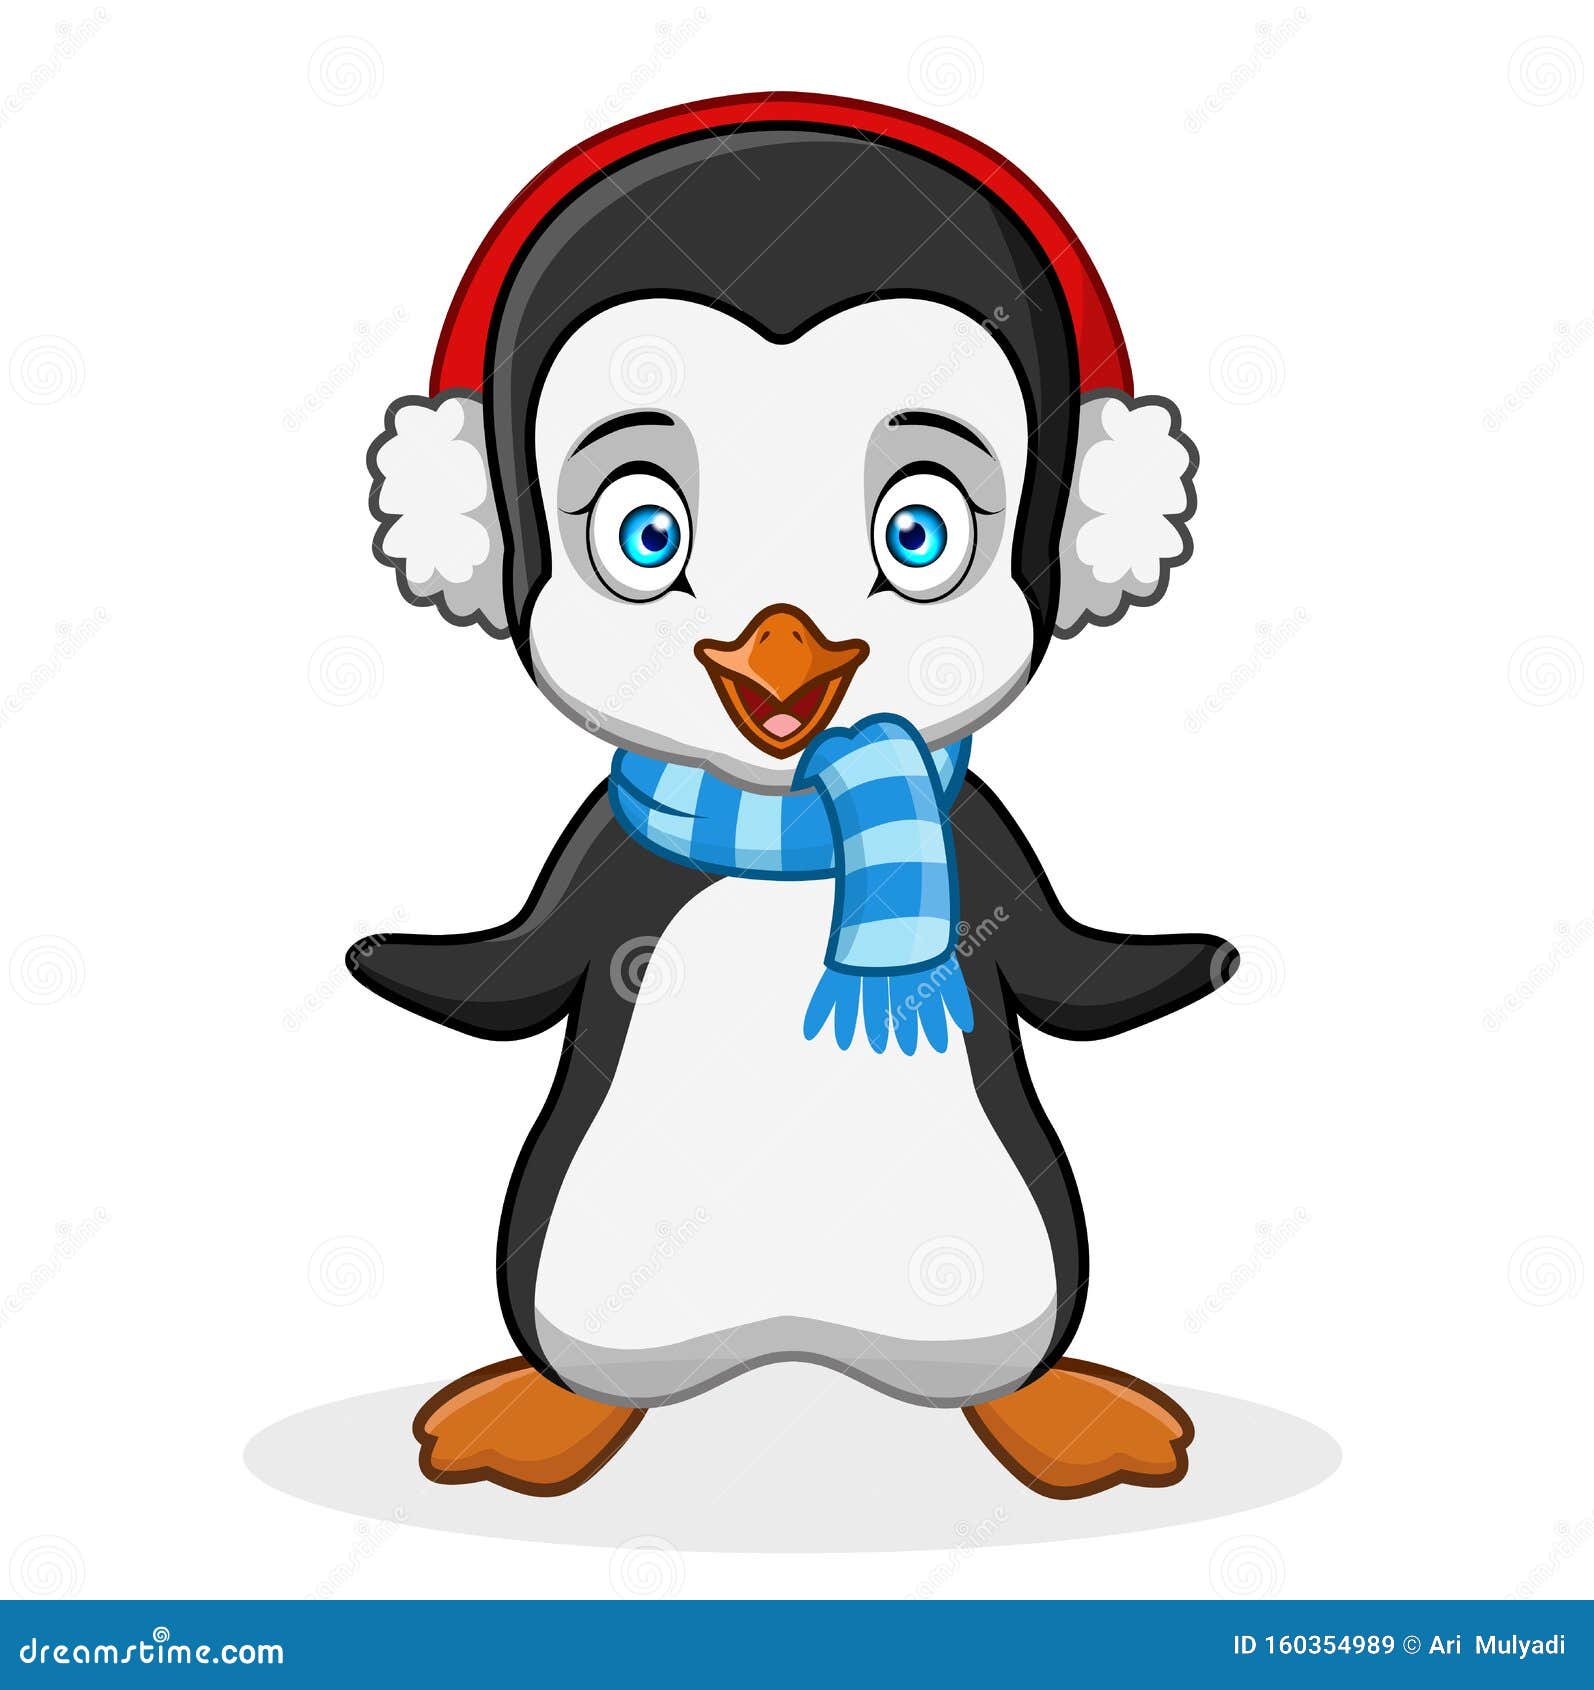 A Funny Cartoon Penguin Christmas Wearing a Scarf while Listening To Music  Using an Ear Phone. Stock Illustration - Illustration of cartoon, card:  160354989